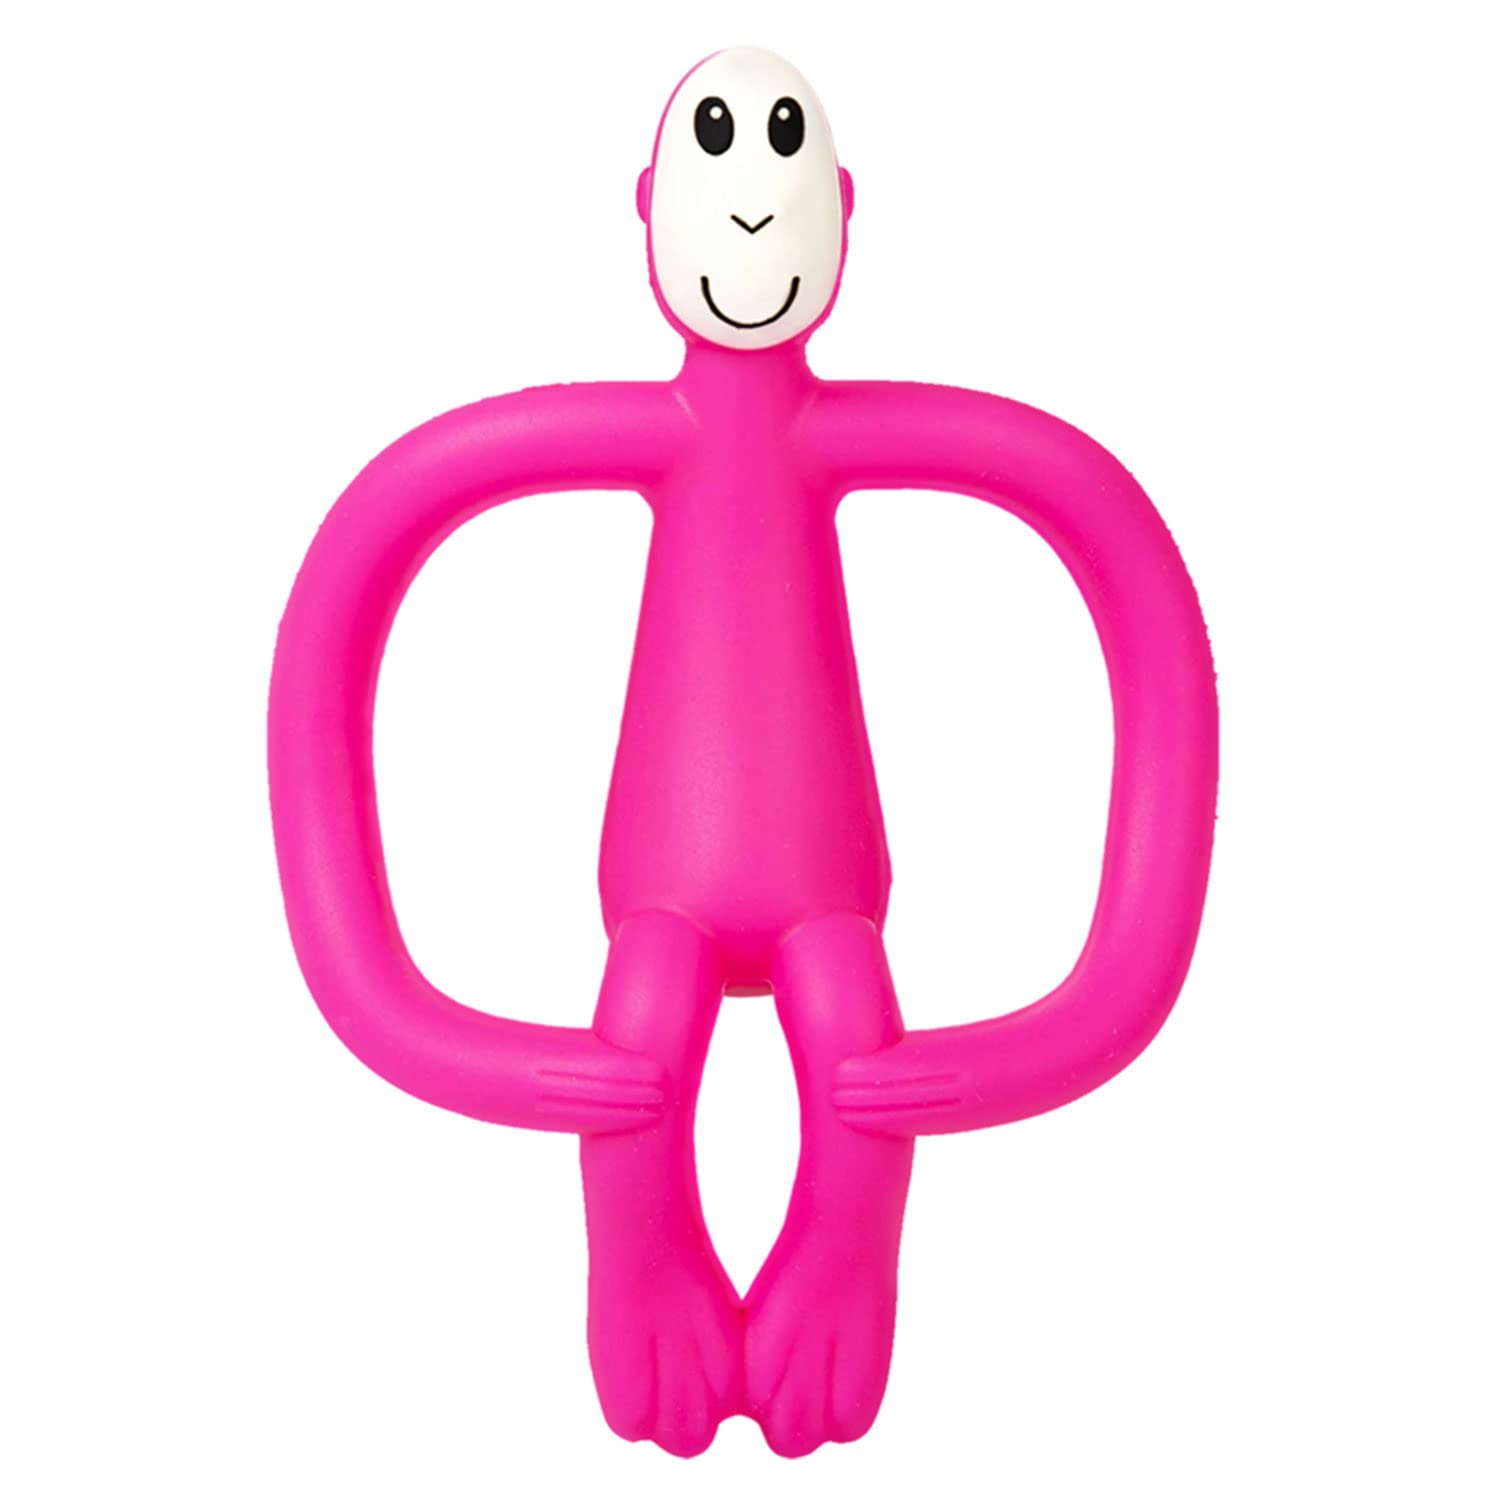 HOPOP Easy Grip Monkey Shaped Silicone Teether - Pink 4m+